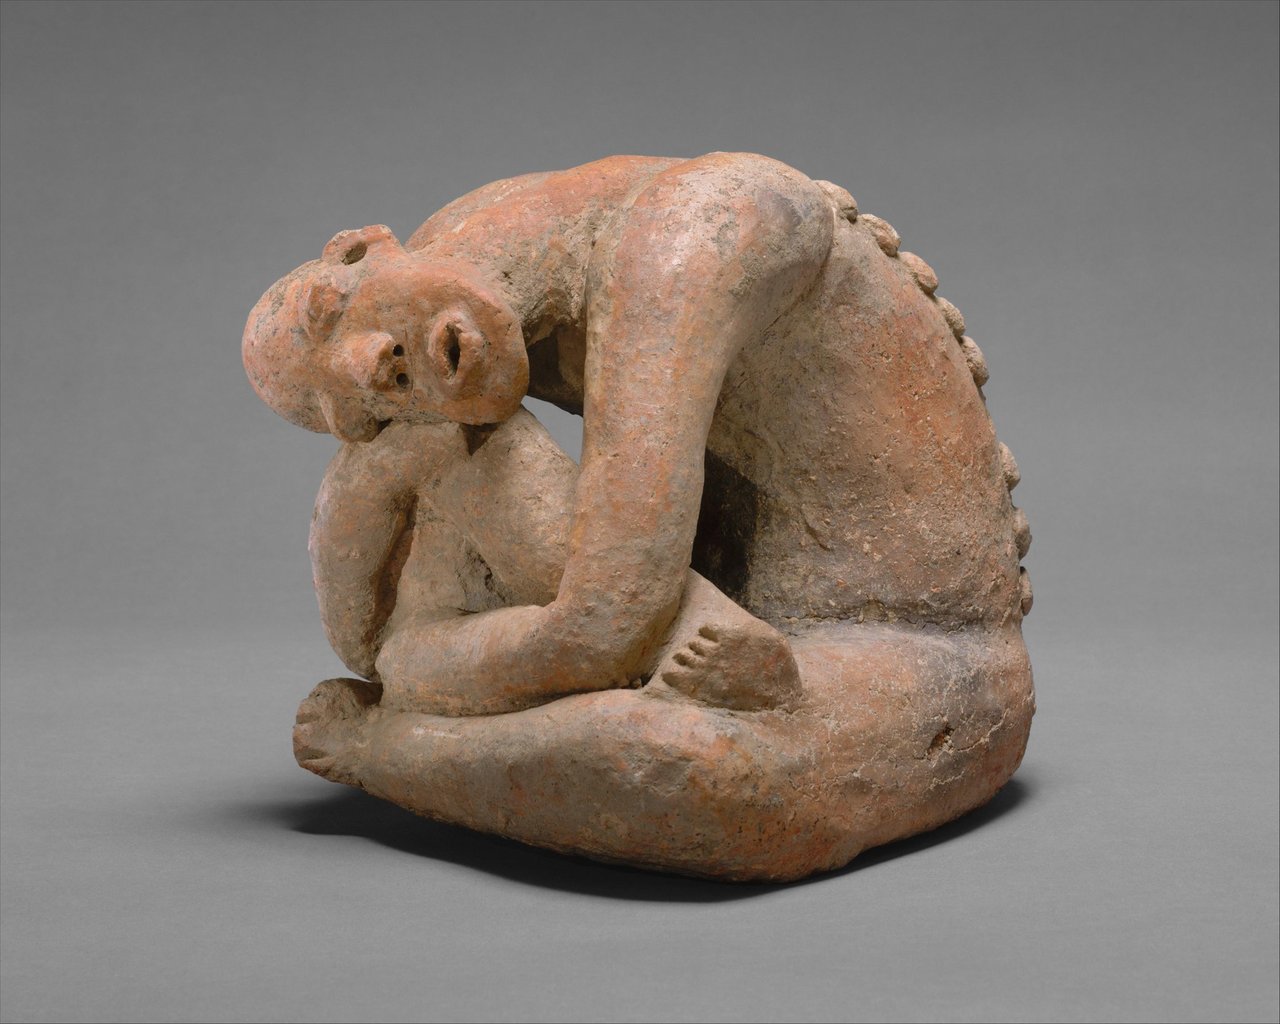 RT @metmuseum: This terracotta sculpture comes from Jenne-jeno, the oldest known city in sub-Saharan Africa. http://met.org/1PTLtgz http://t.co/8w2xZJineB